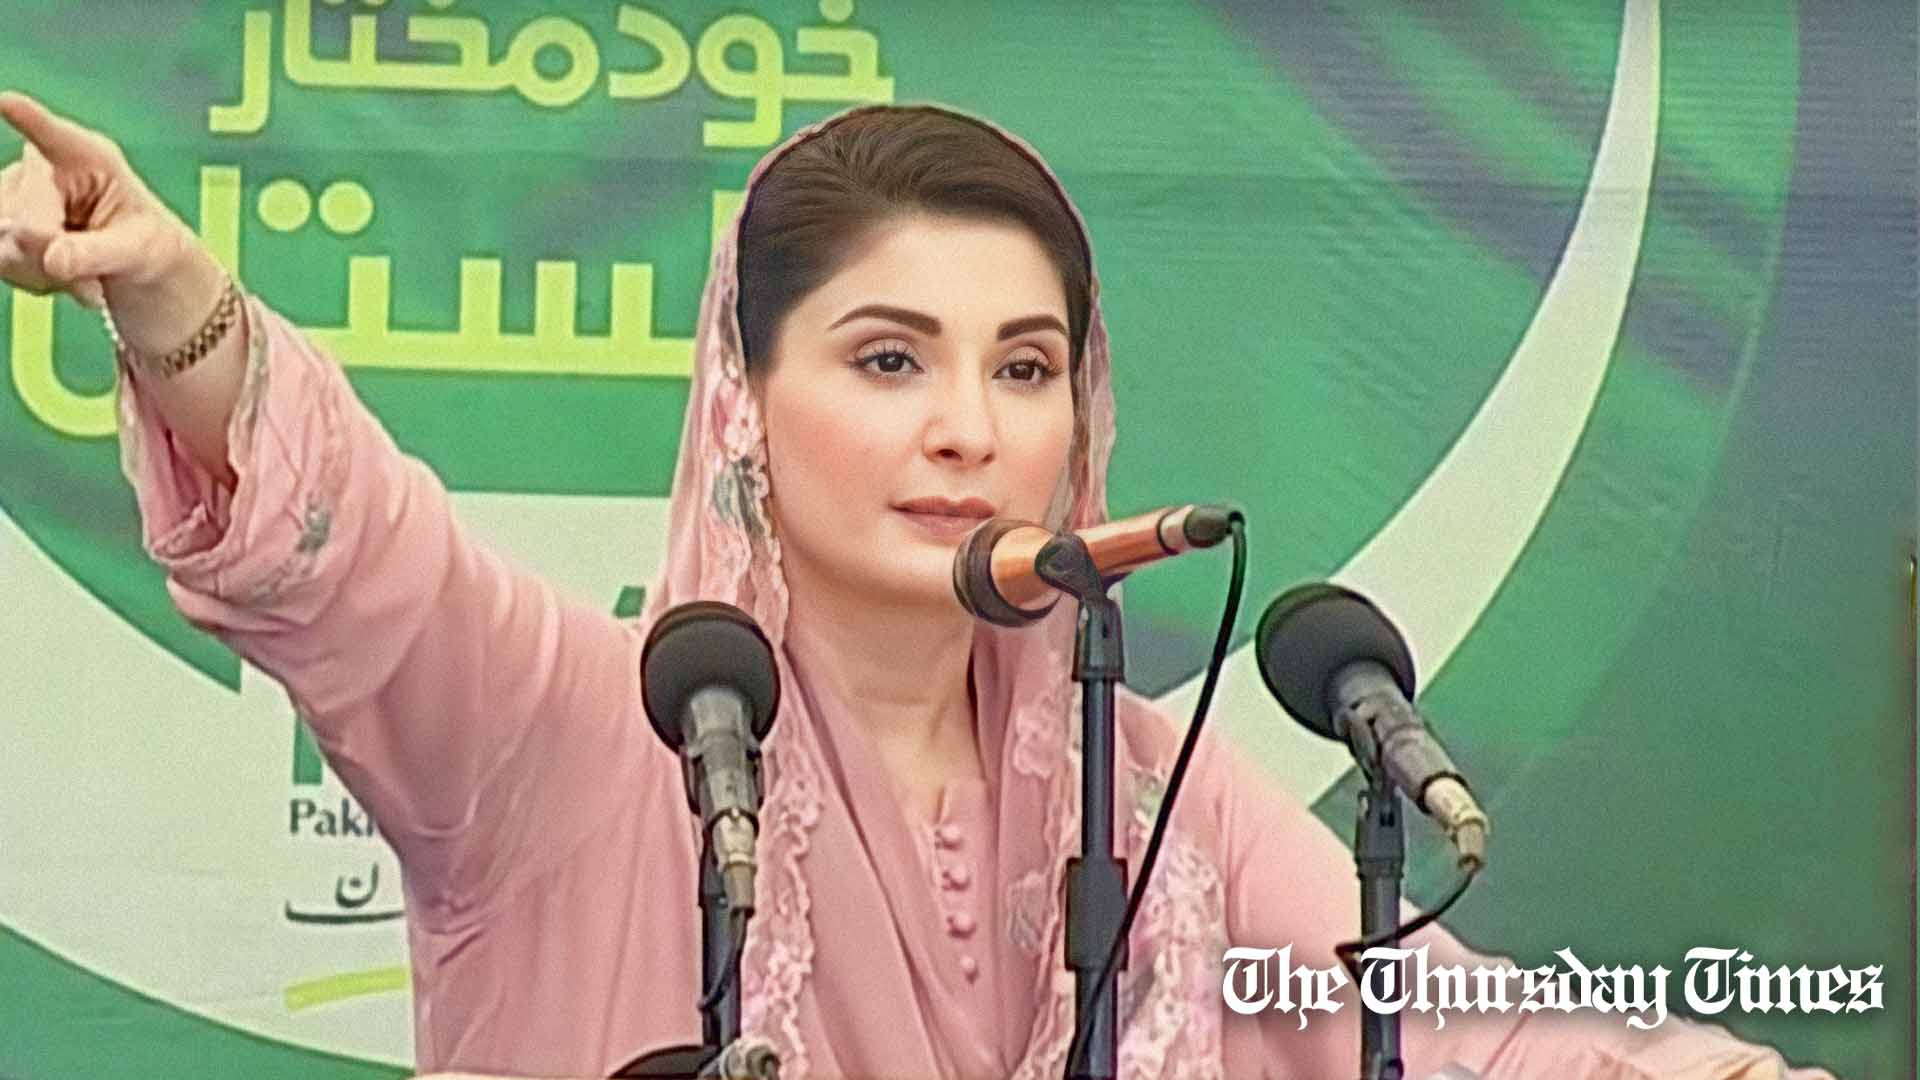 PML(N) senior vice president Maryam Nawaz is shown addressing party workers on Labour Day at Lahore's Model Town. — FILE/THE THURSDAY TIMES